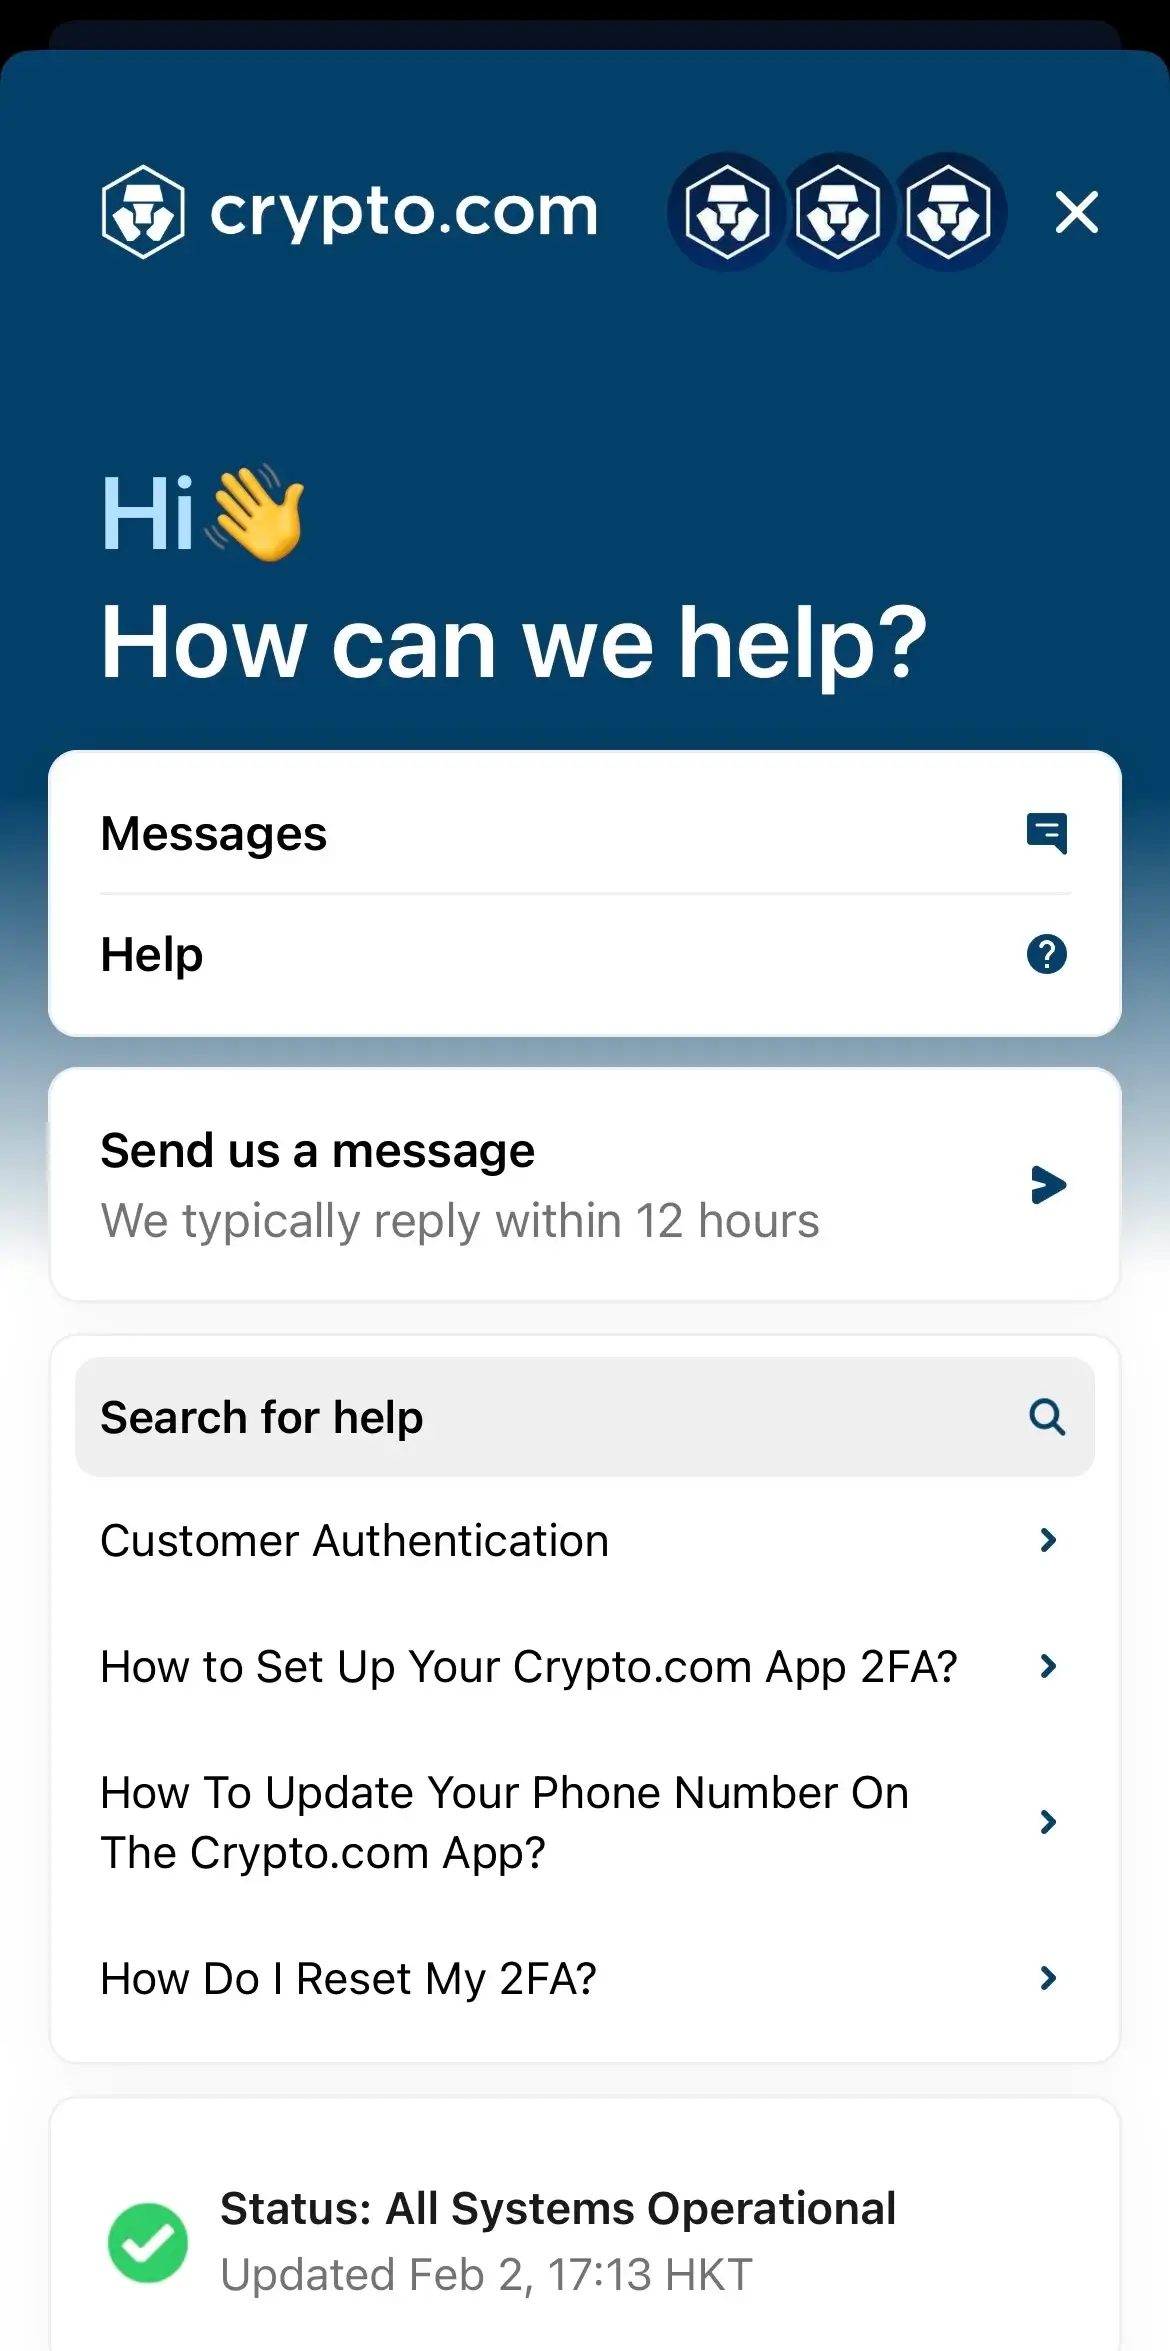 Afterward, click on "Messages" and start a new conversation with Crypto.com.